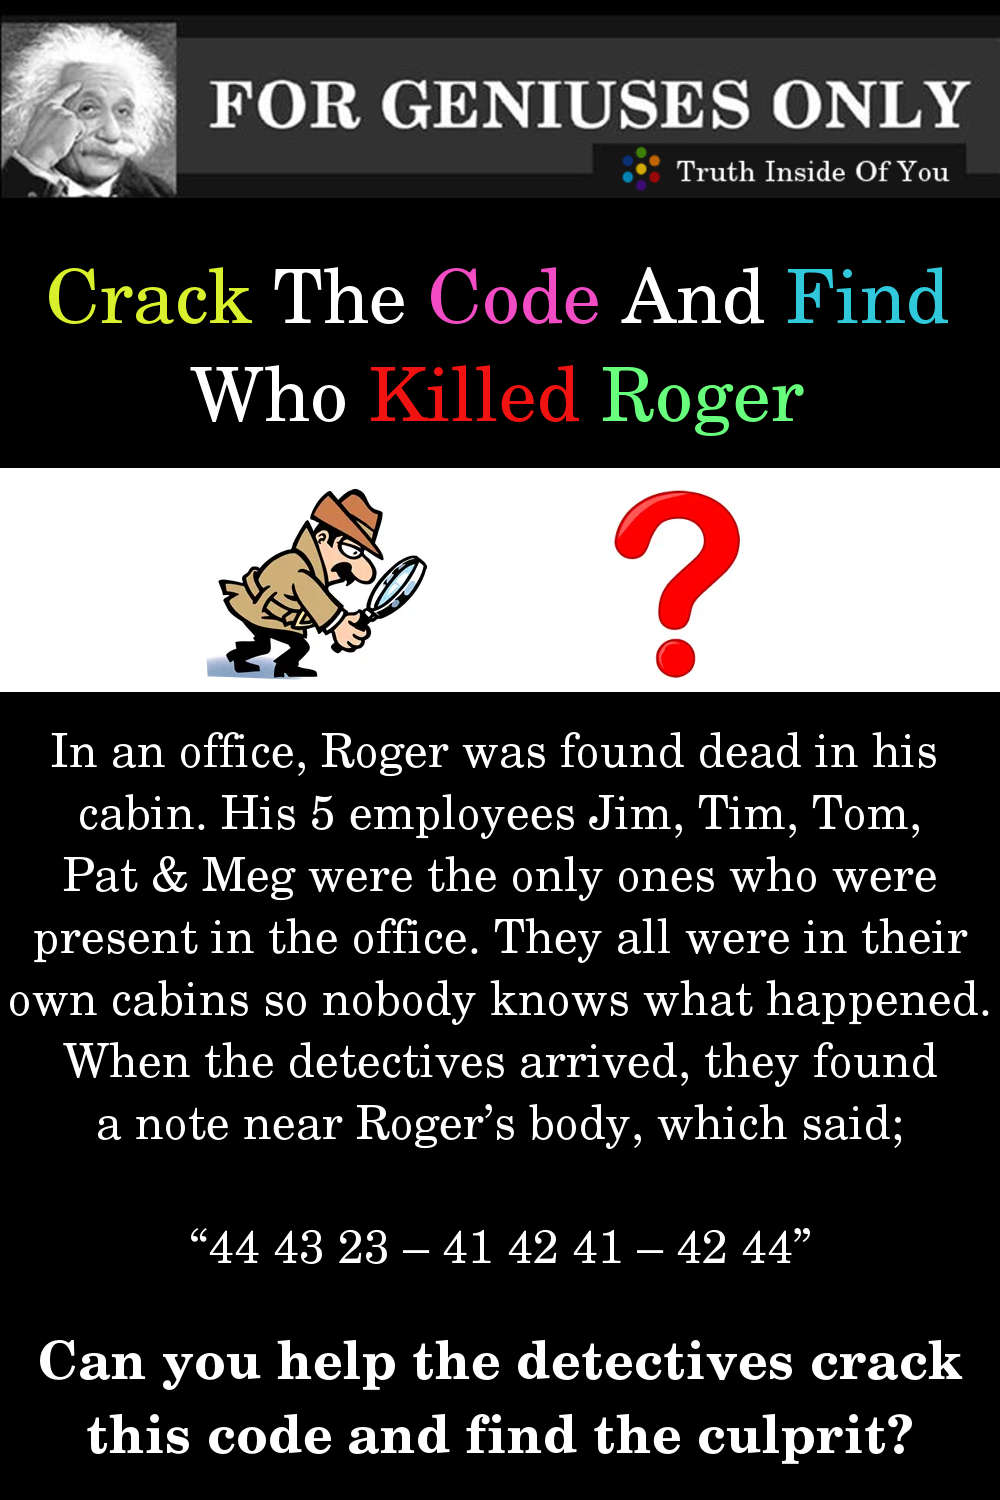 Riddle: Crack the Code and Find Who Killed Roger